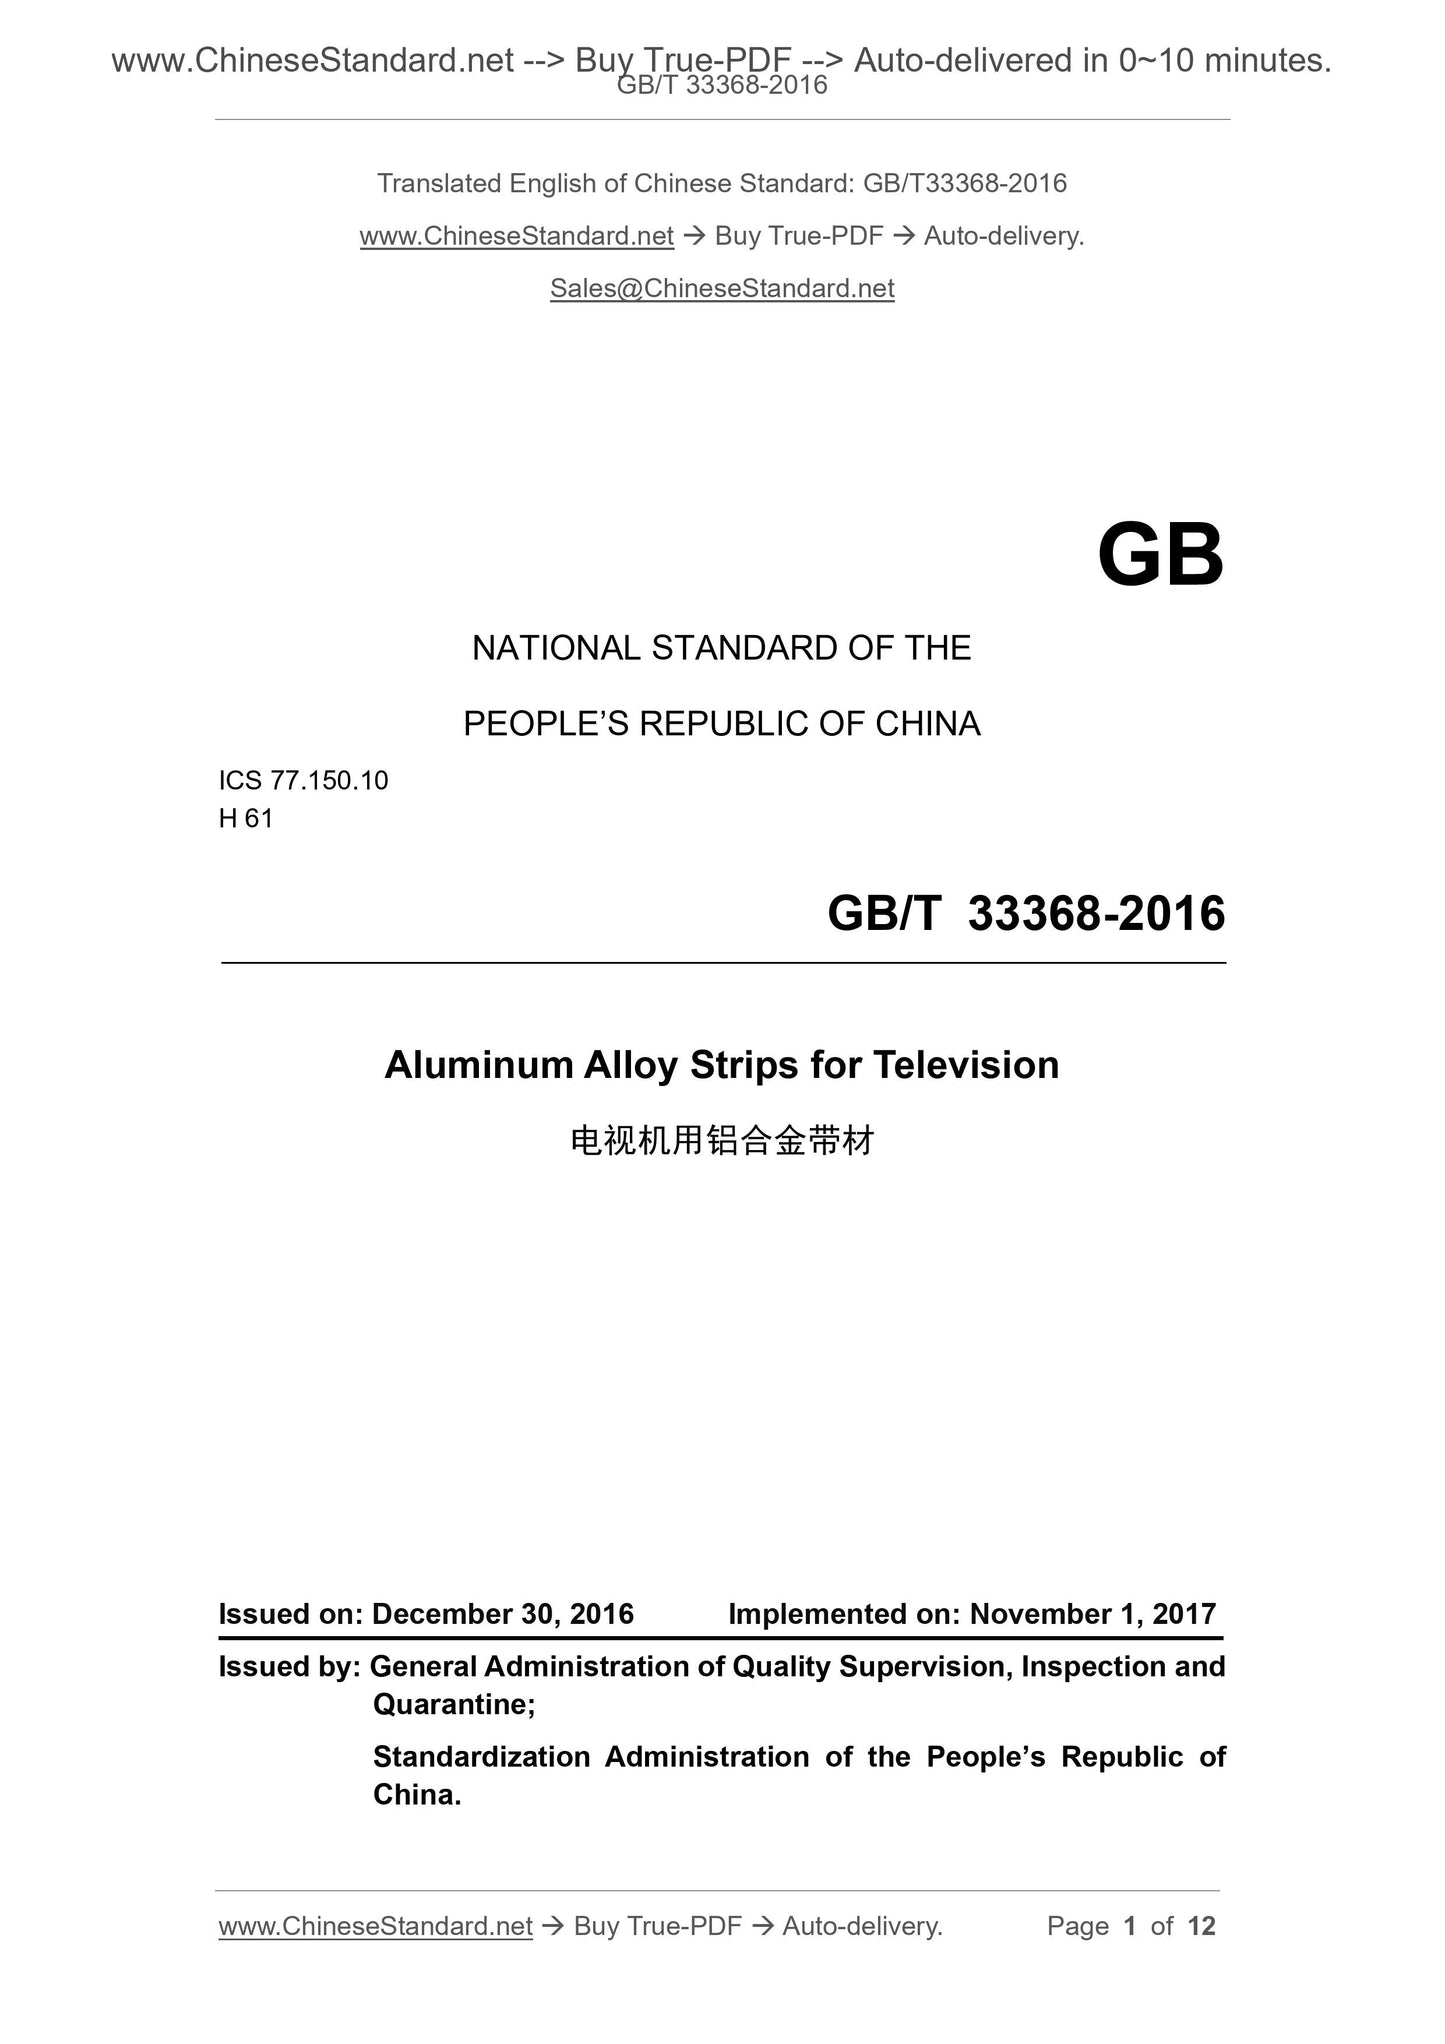 GB/T 33368-2016 Page 1